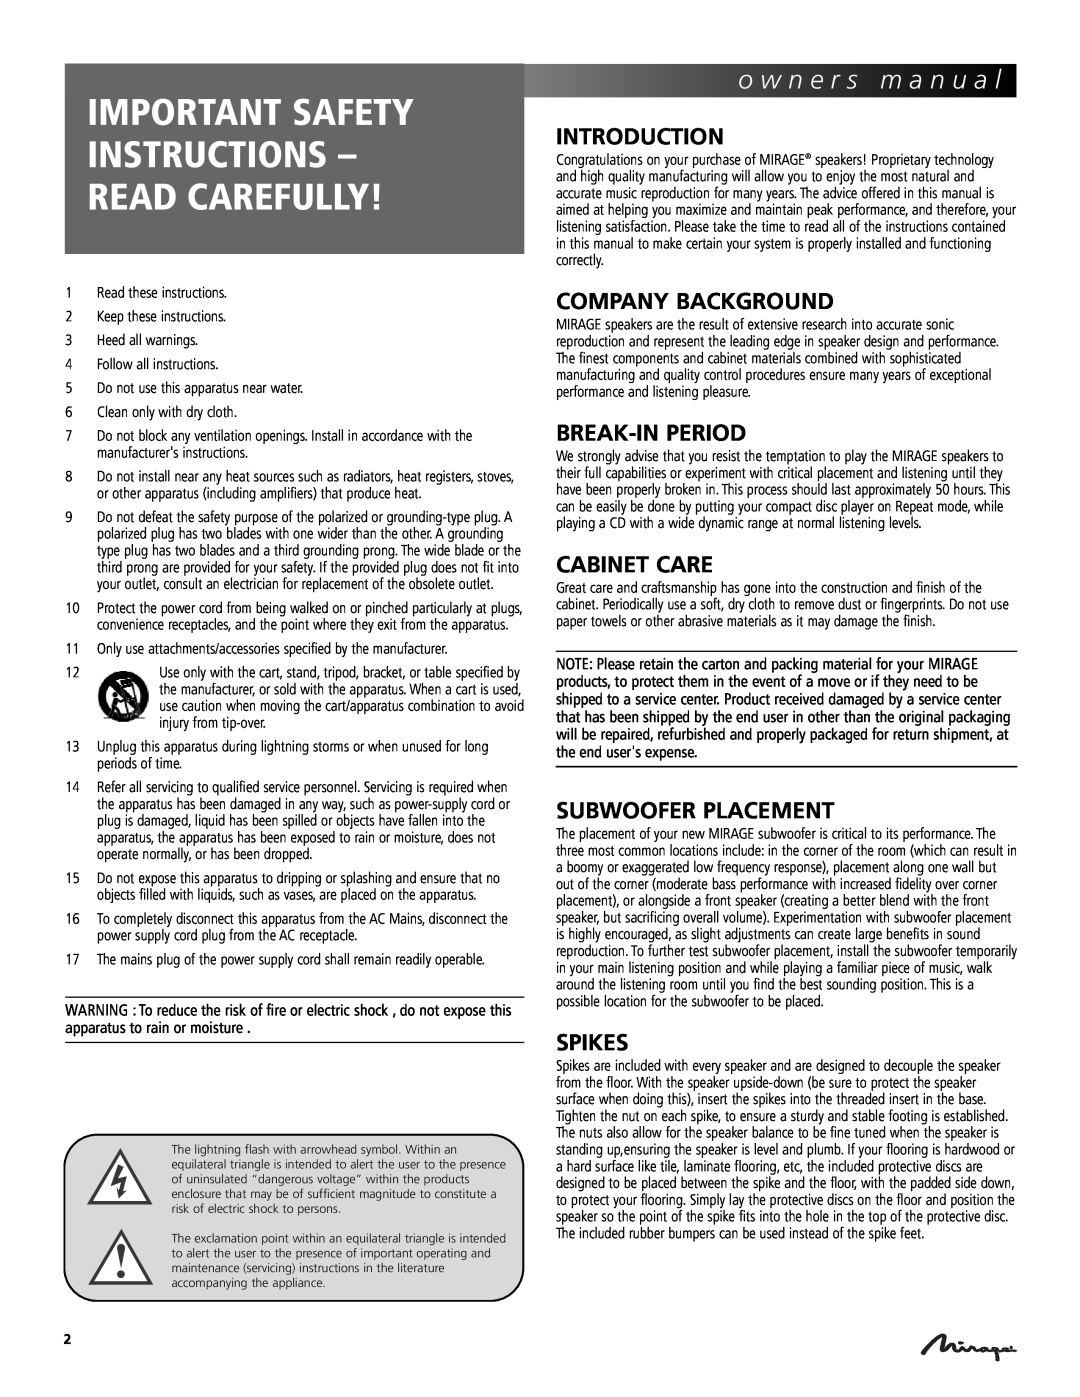 Mirage Loudspeakers Prestige S10 Important Safety Instructions - Read Carefully, o w n e r s m a n u a l, Introduction 